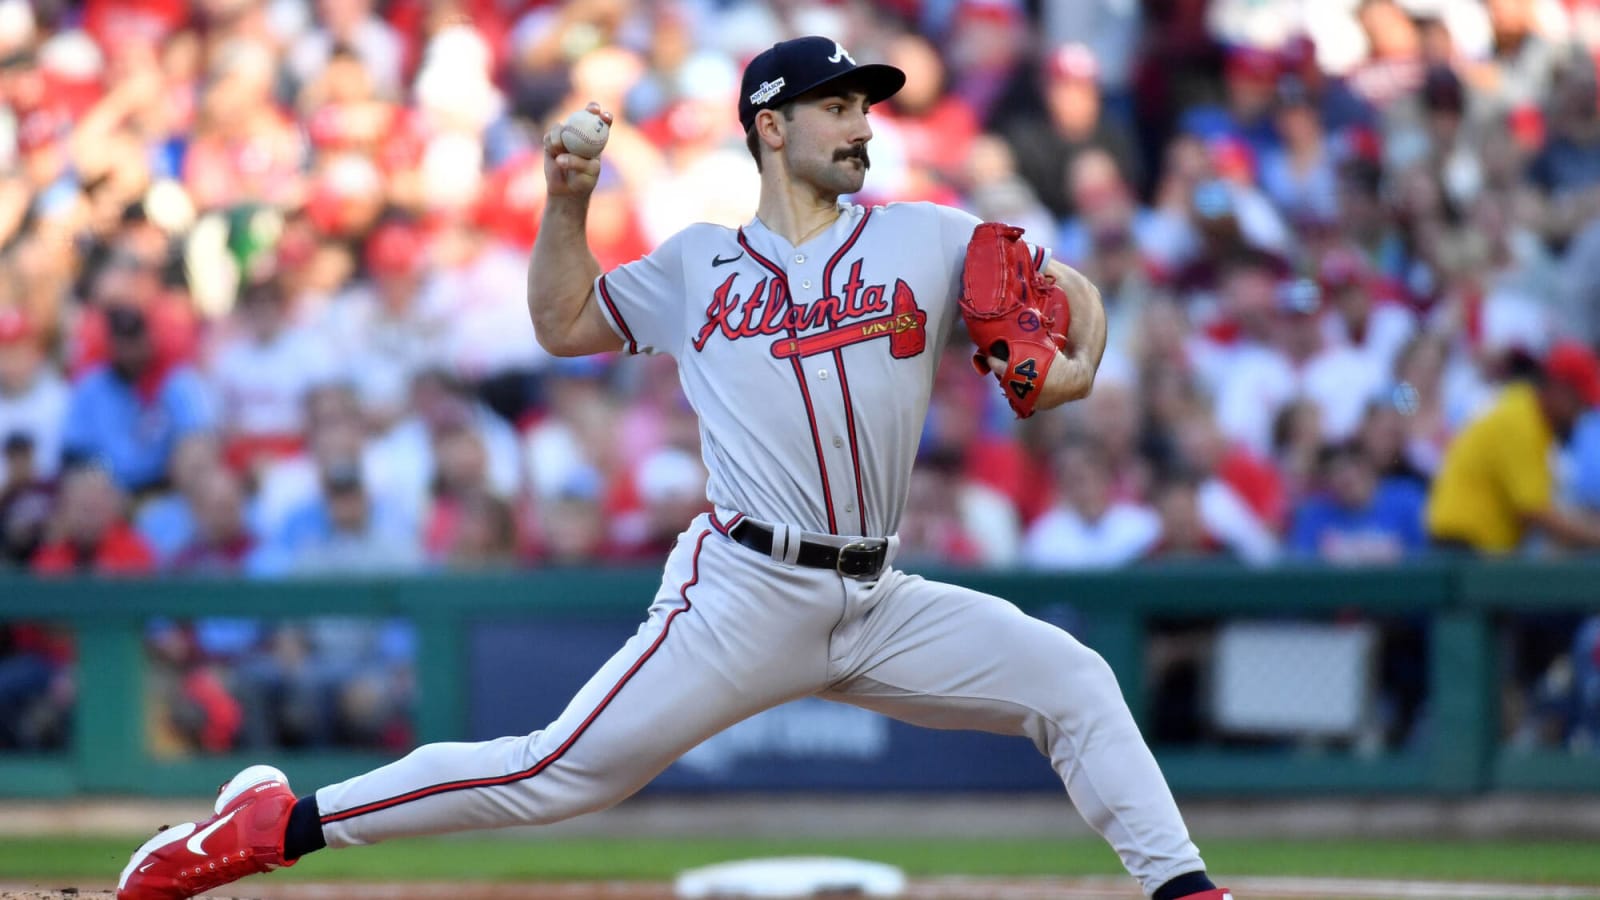 Predicting the 2023 stats of each Braves player — Spencer Strider